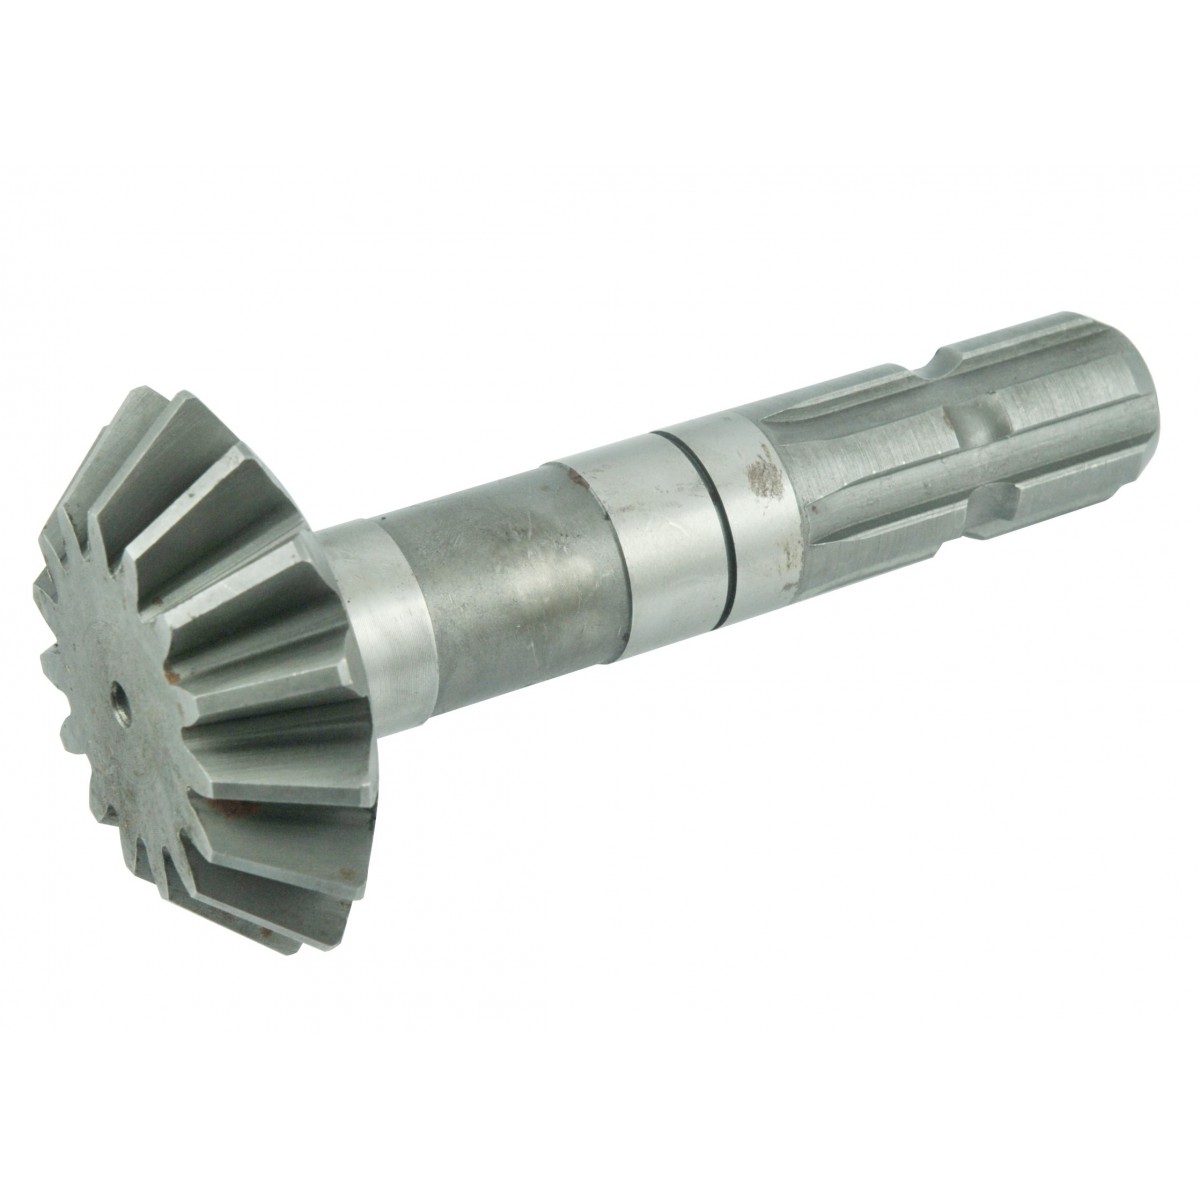 Input shaft of the angle gear for SB tiller and others